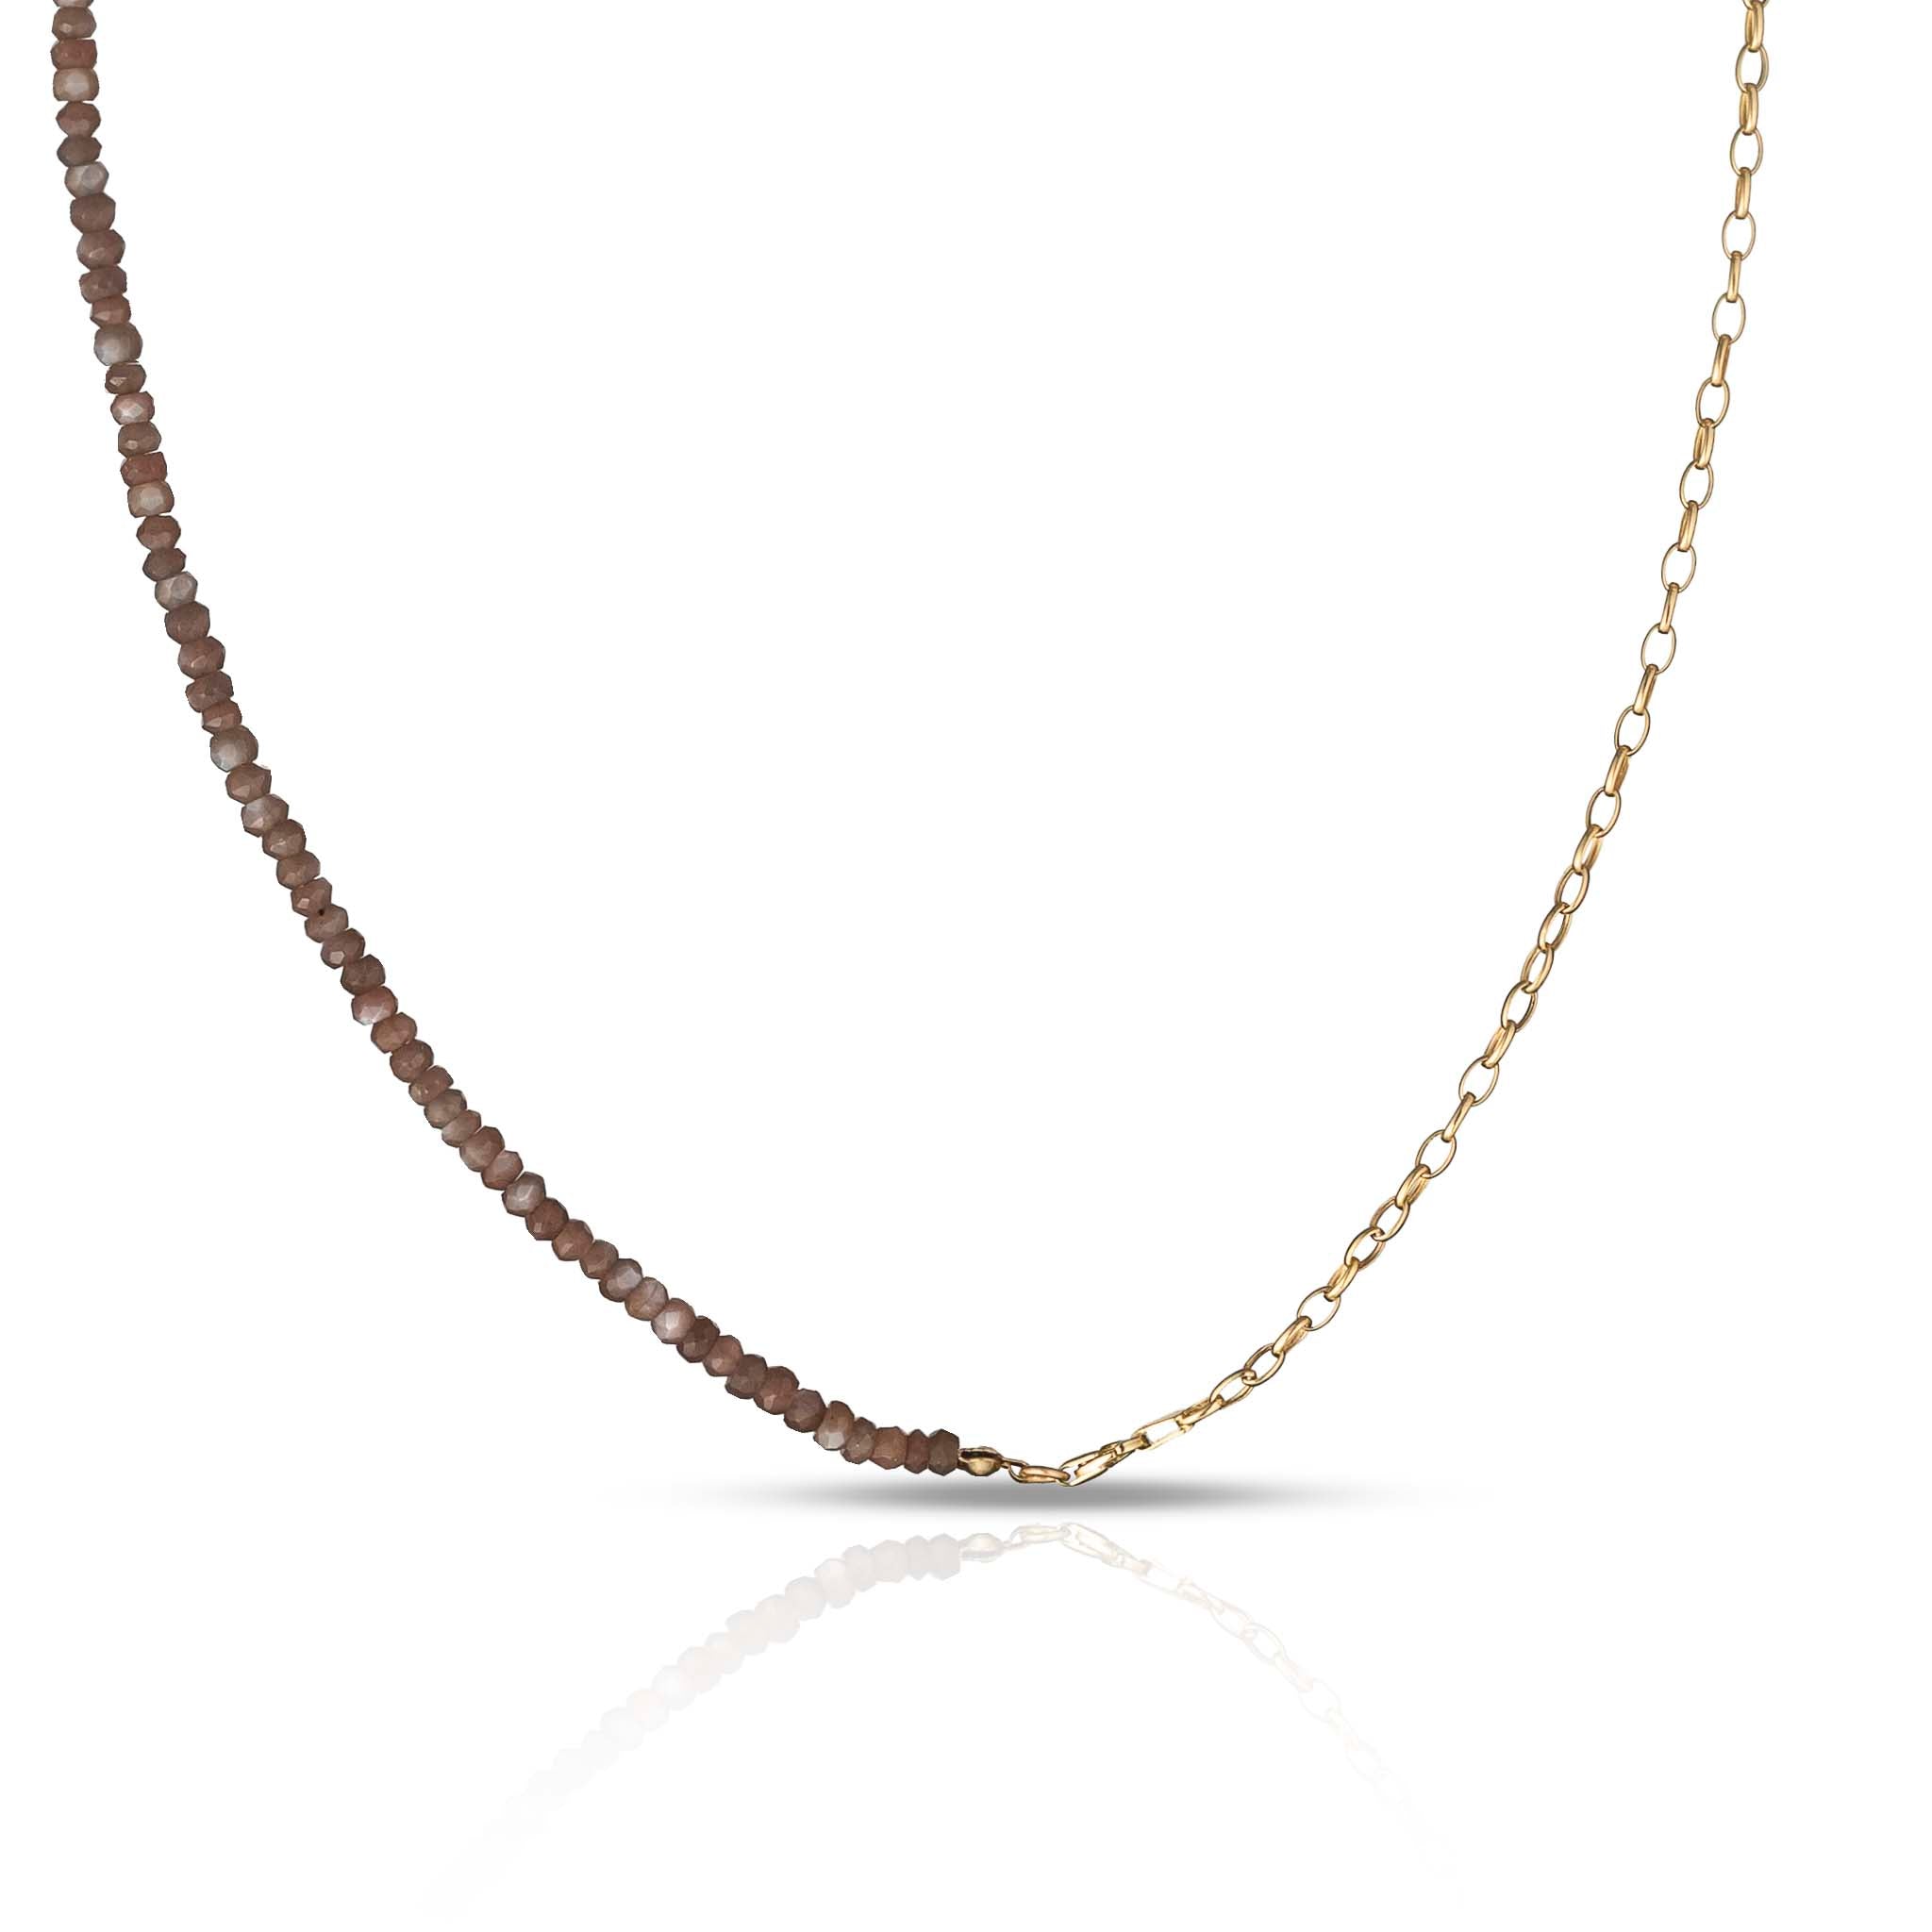 Beaded Mocha Moonstone with Gold Rolo Chain Necklace 